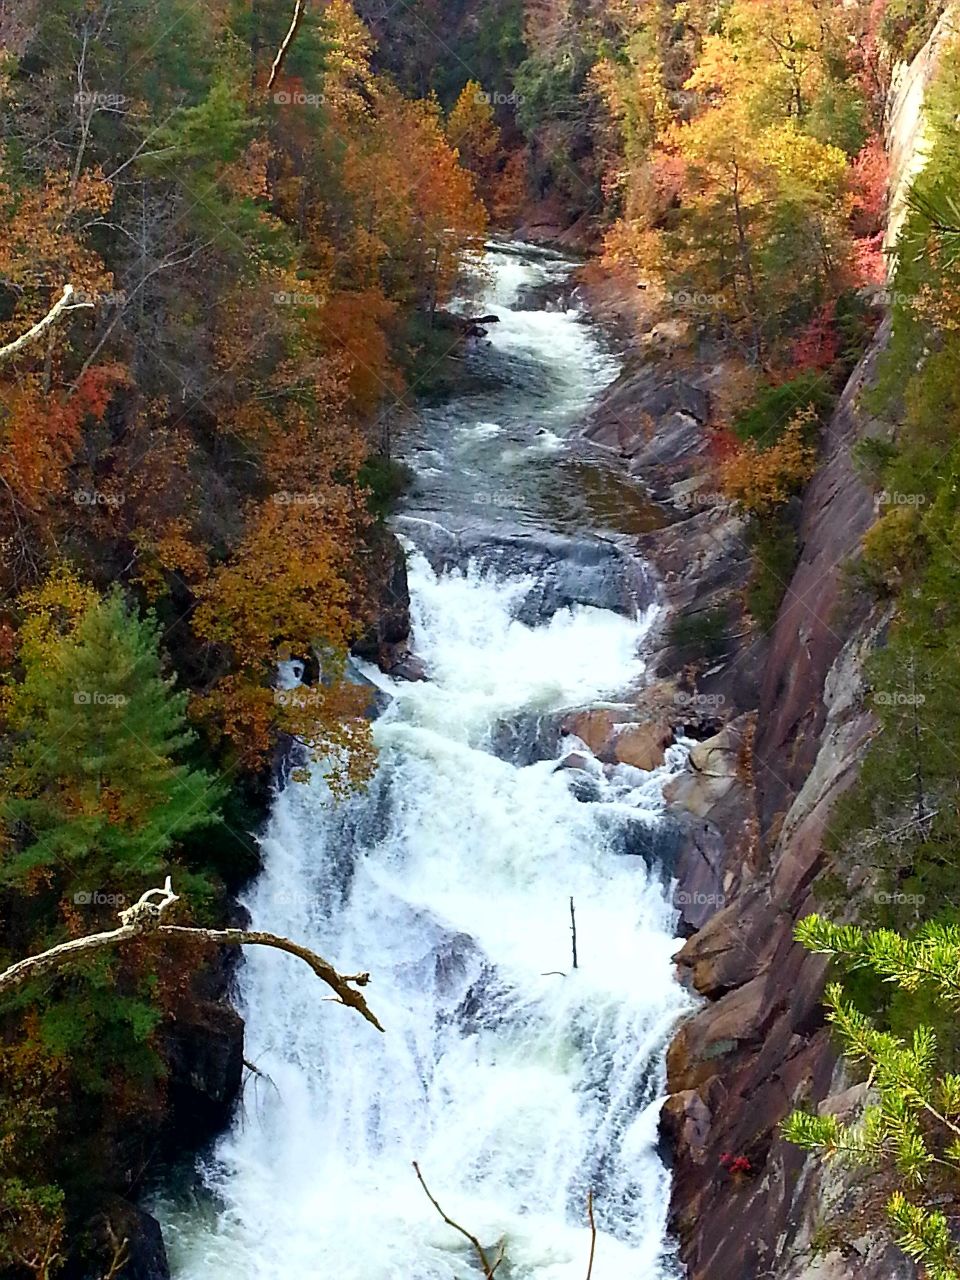 Waterfall surrounded by fall colors at Tallulah gorge state park in Georgia